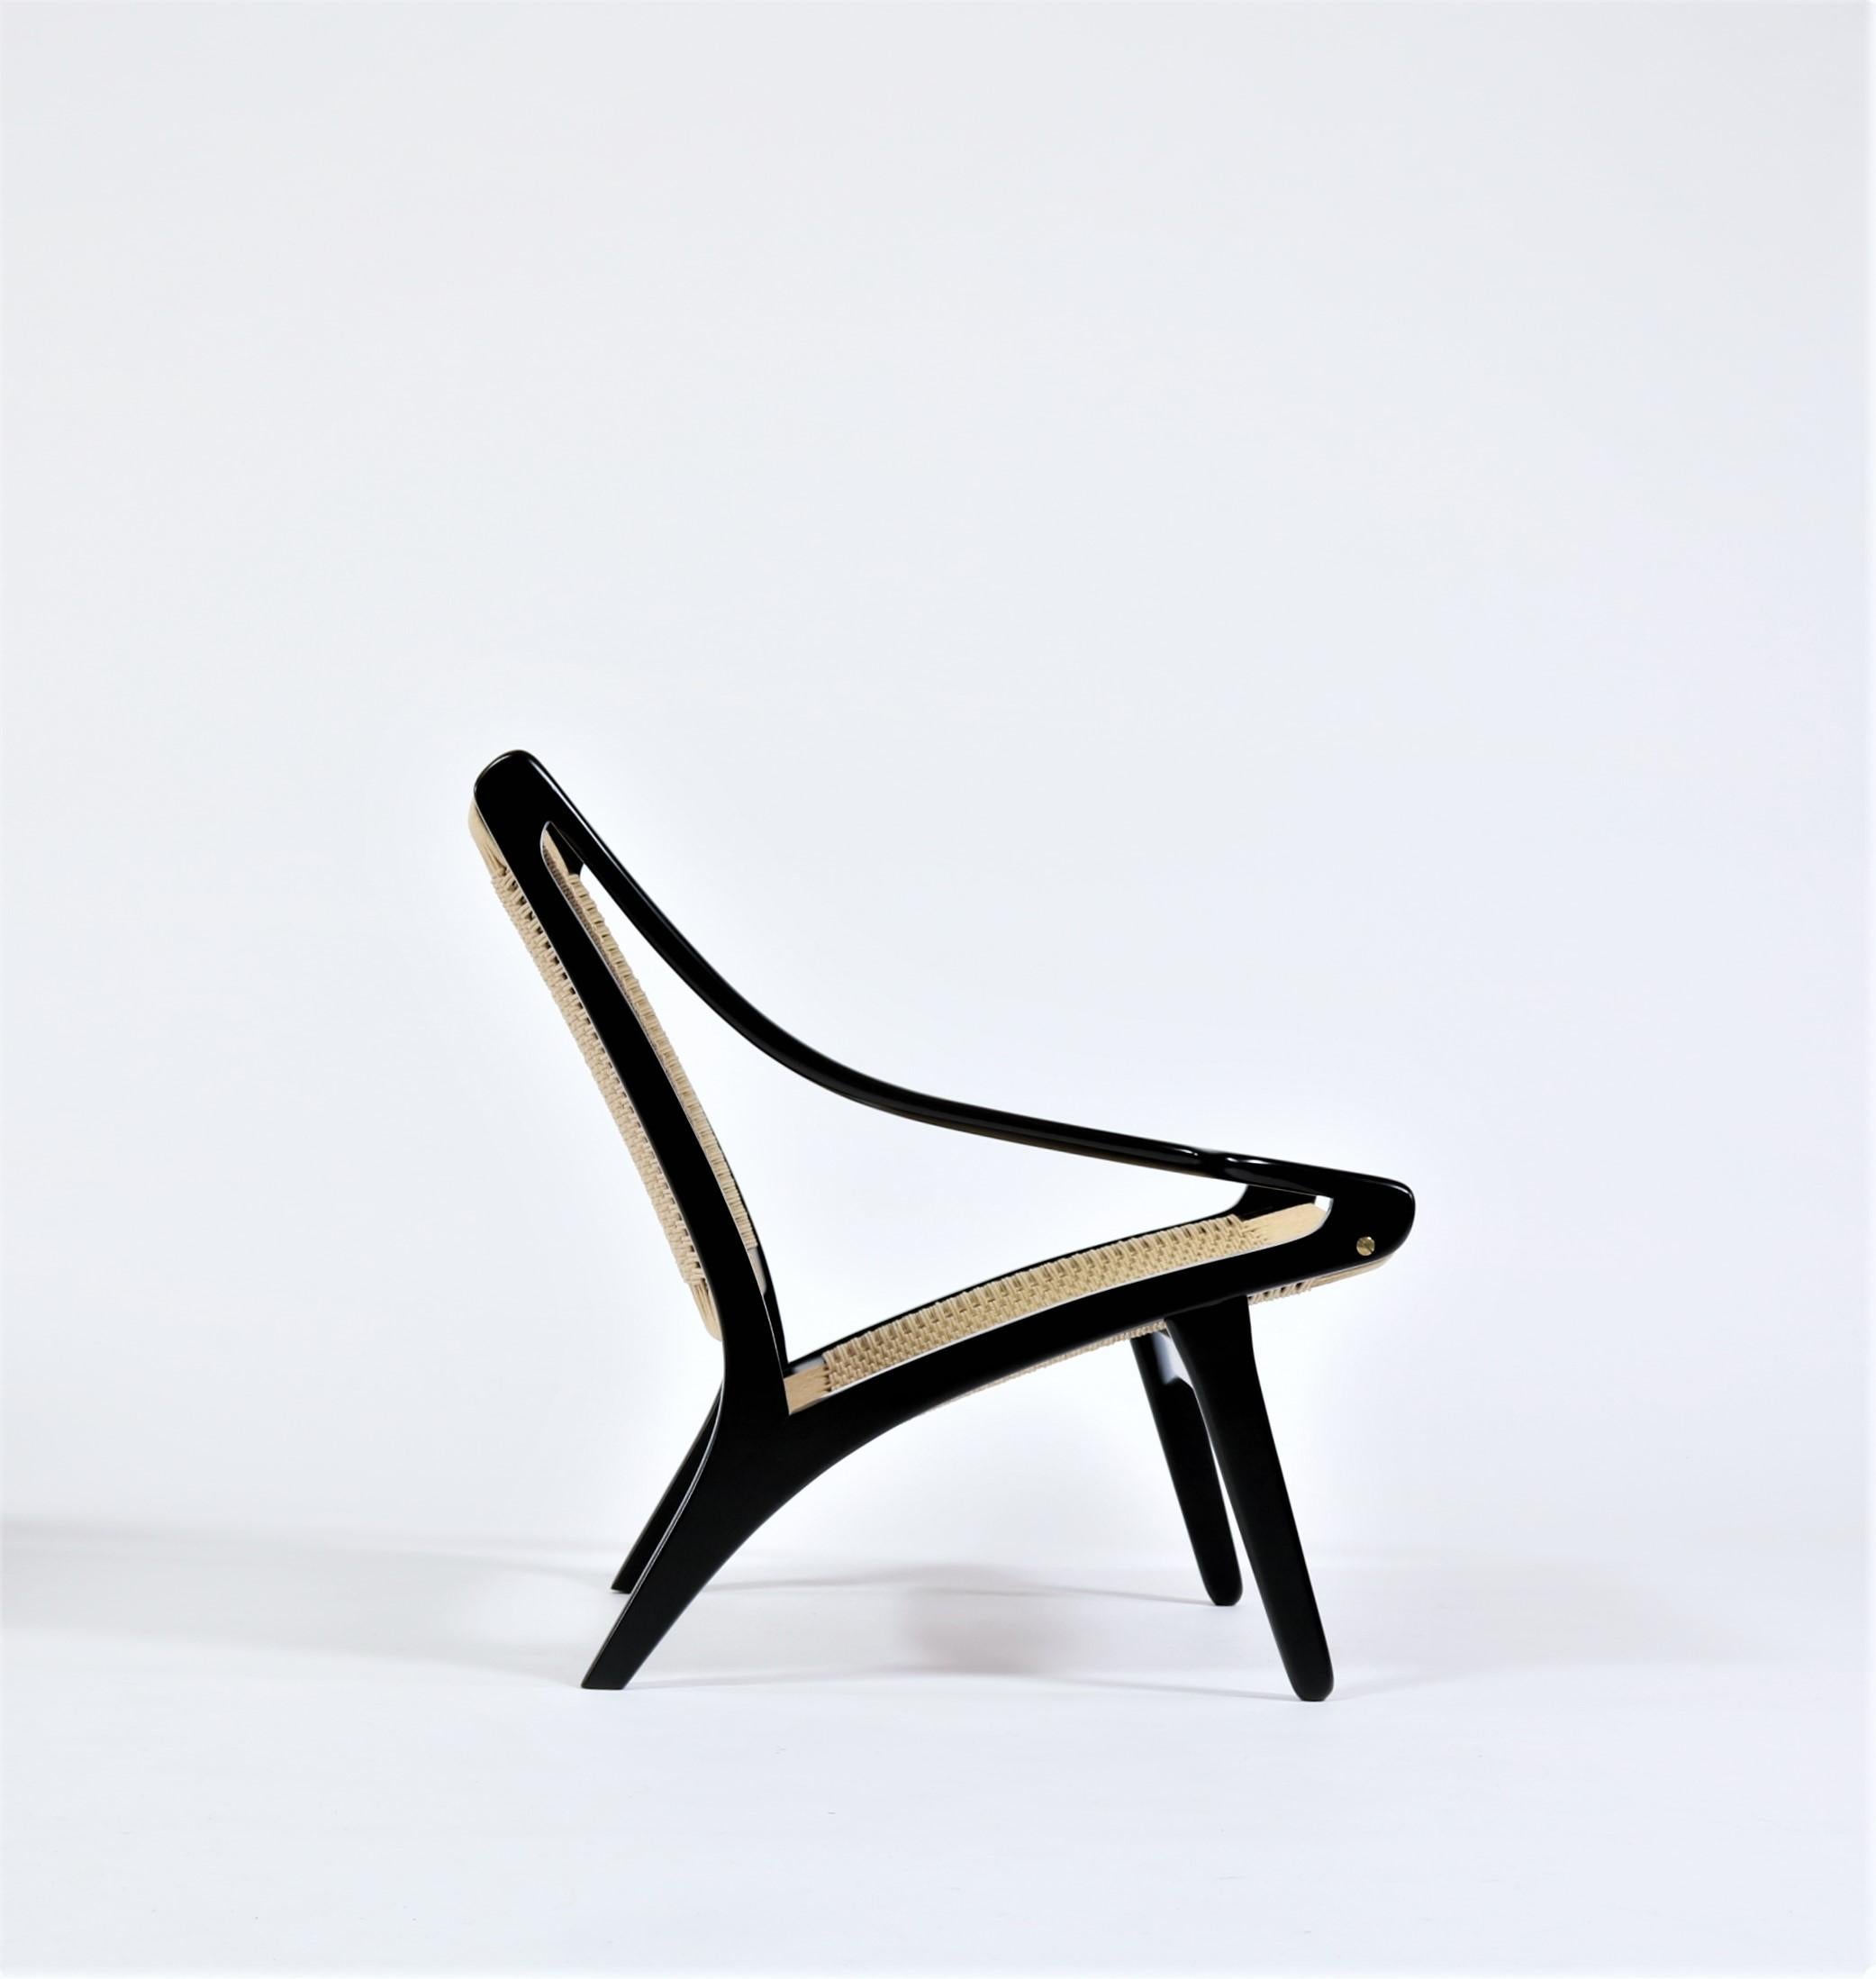 Rare and important 1950s lounge chair in lacquered beech and paper cord by Danish designer Illum Wikkelsø. This stunning chair was manufactured at the cabinetmaker N. Eilersen in the early 1950s for a very short period of time. Brilliant design and